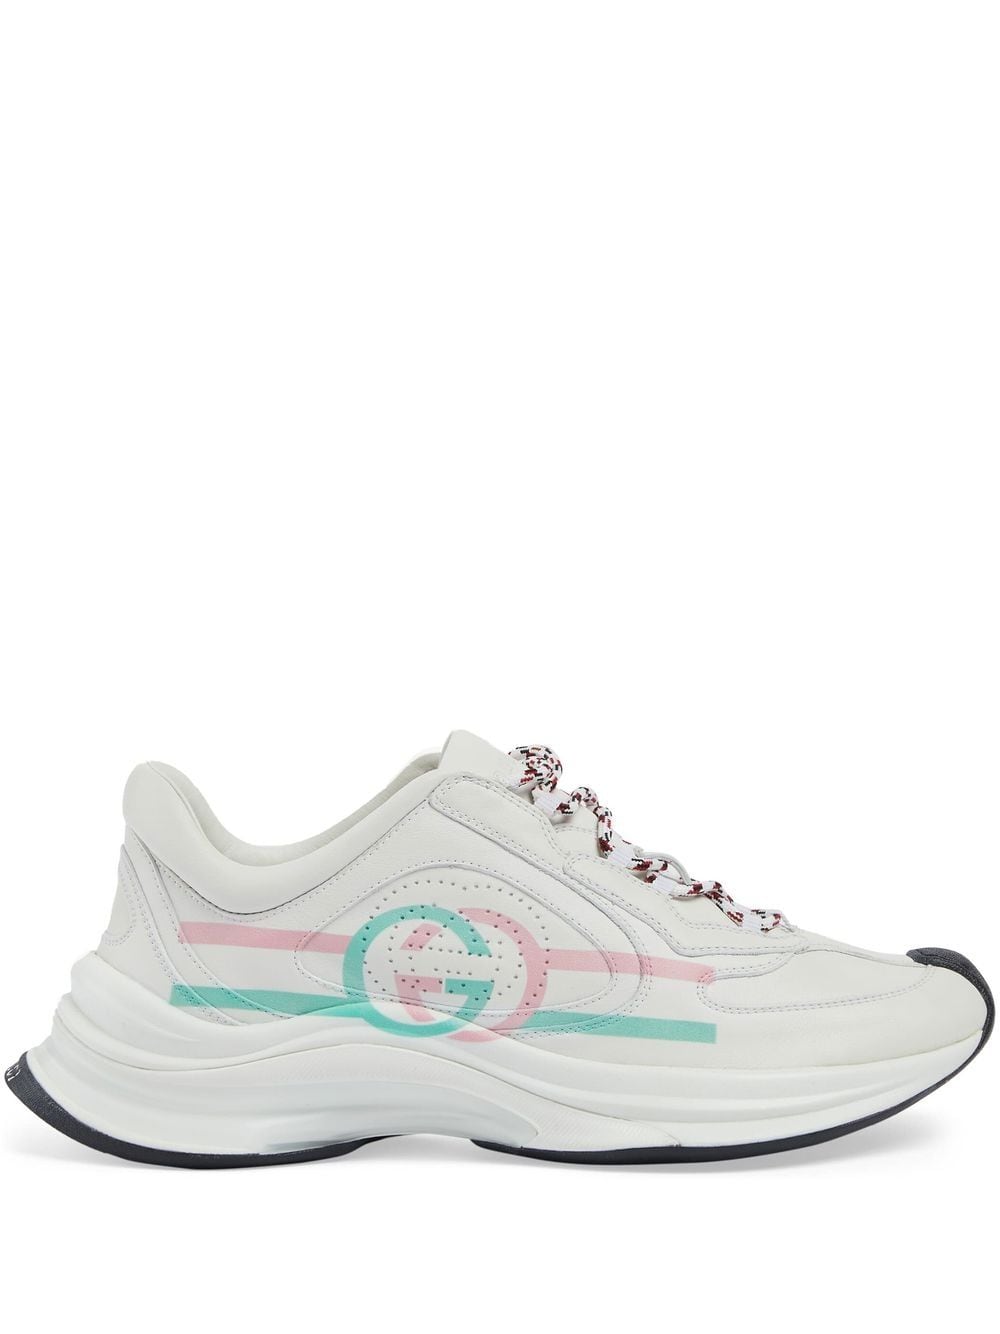 GUCCI Streamlined Fashion Essential: Women's White, Pink, and Green Leather Sneakers